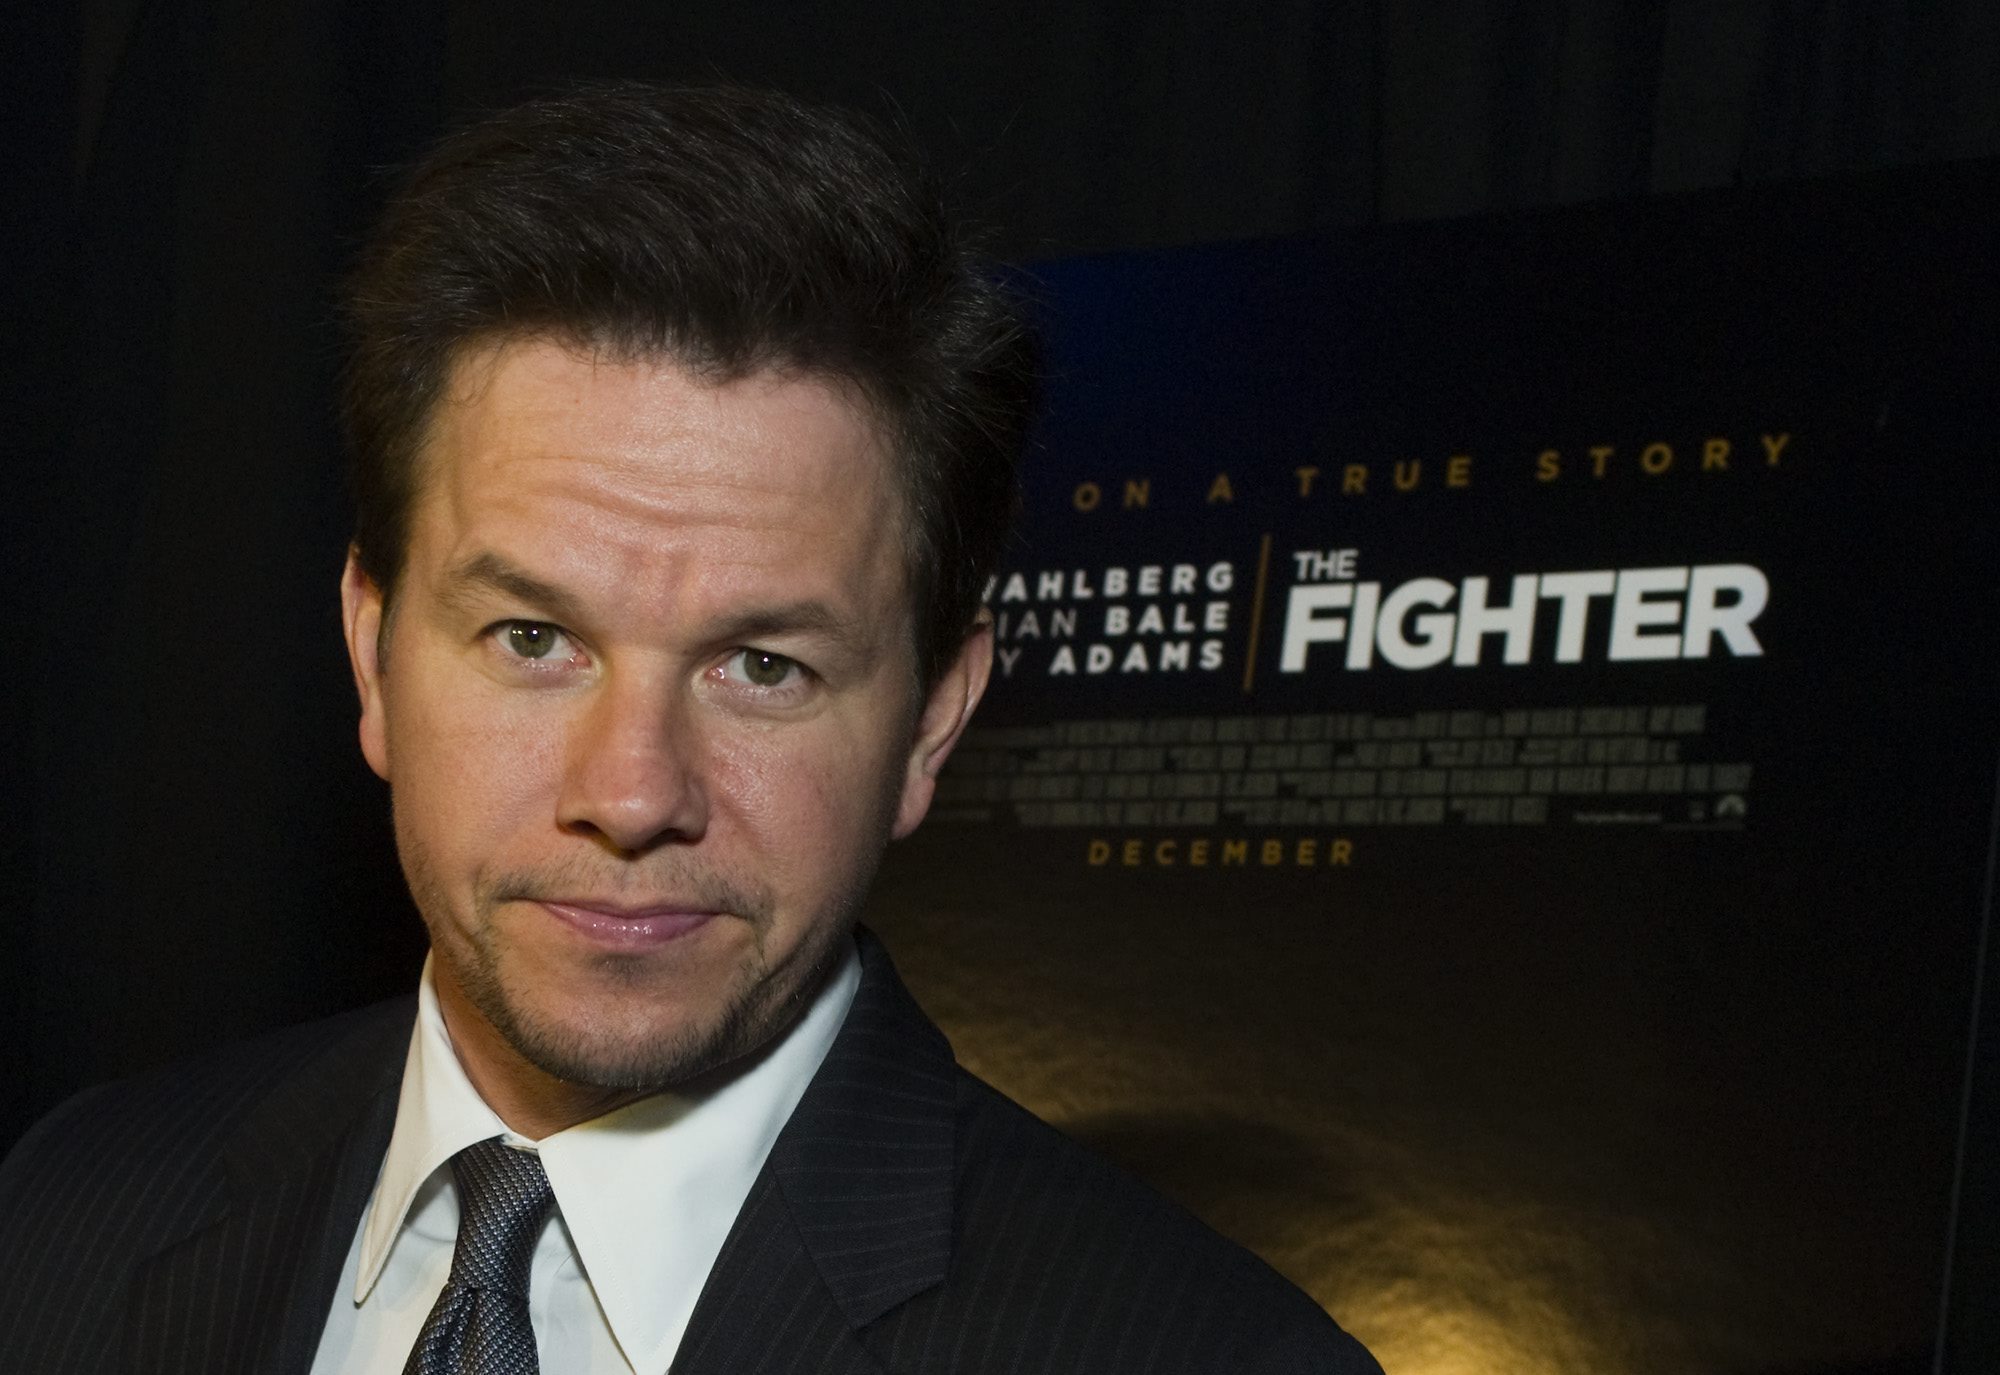 Mickey Ward, Christian Bale, Mark Wahlberg, The Fighter